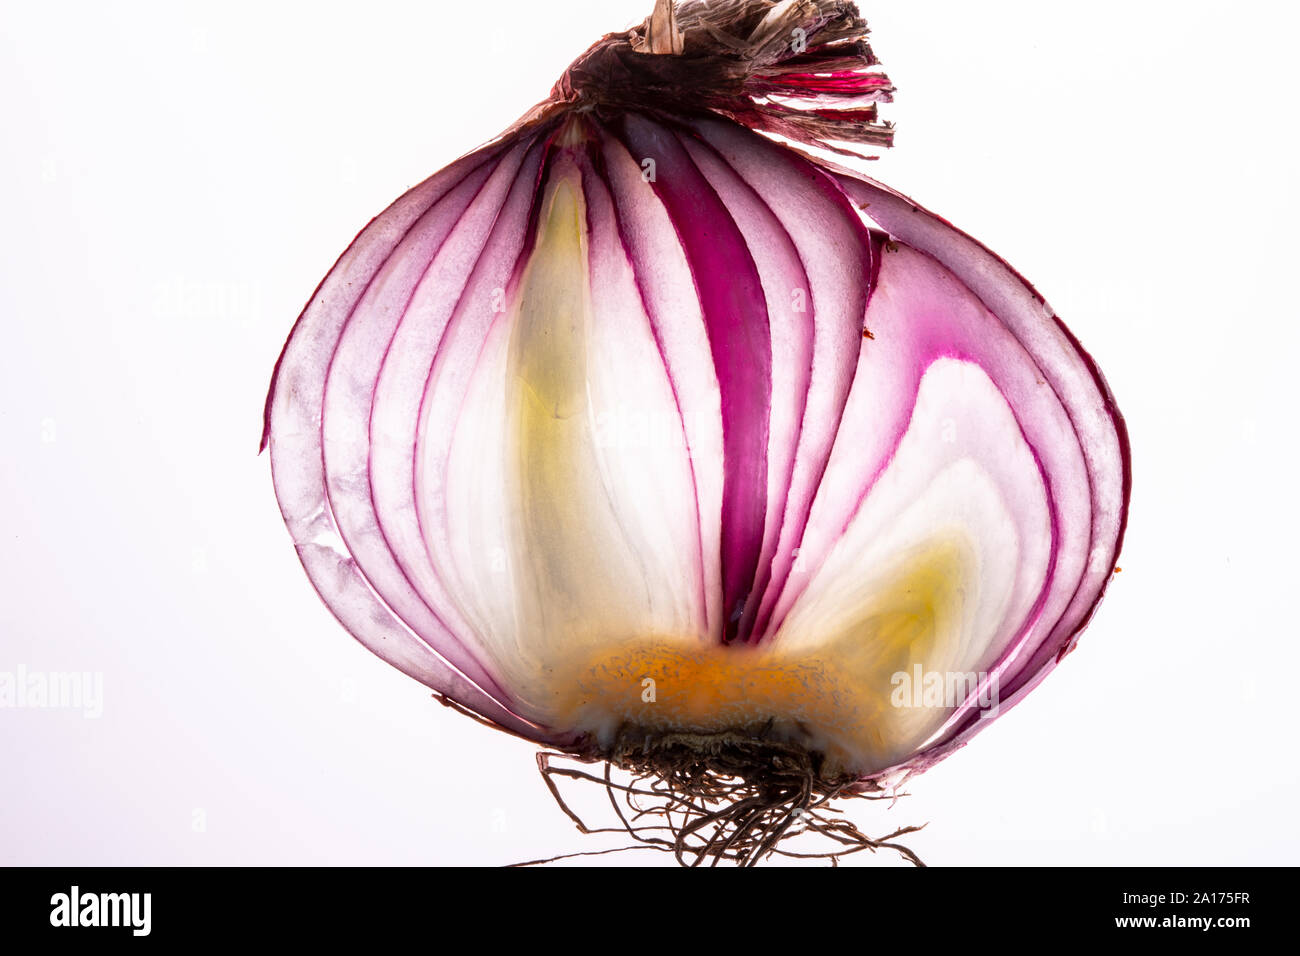 transparency red onion Stock Photo